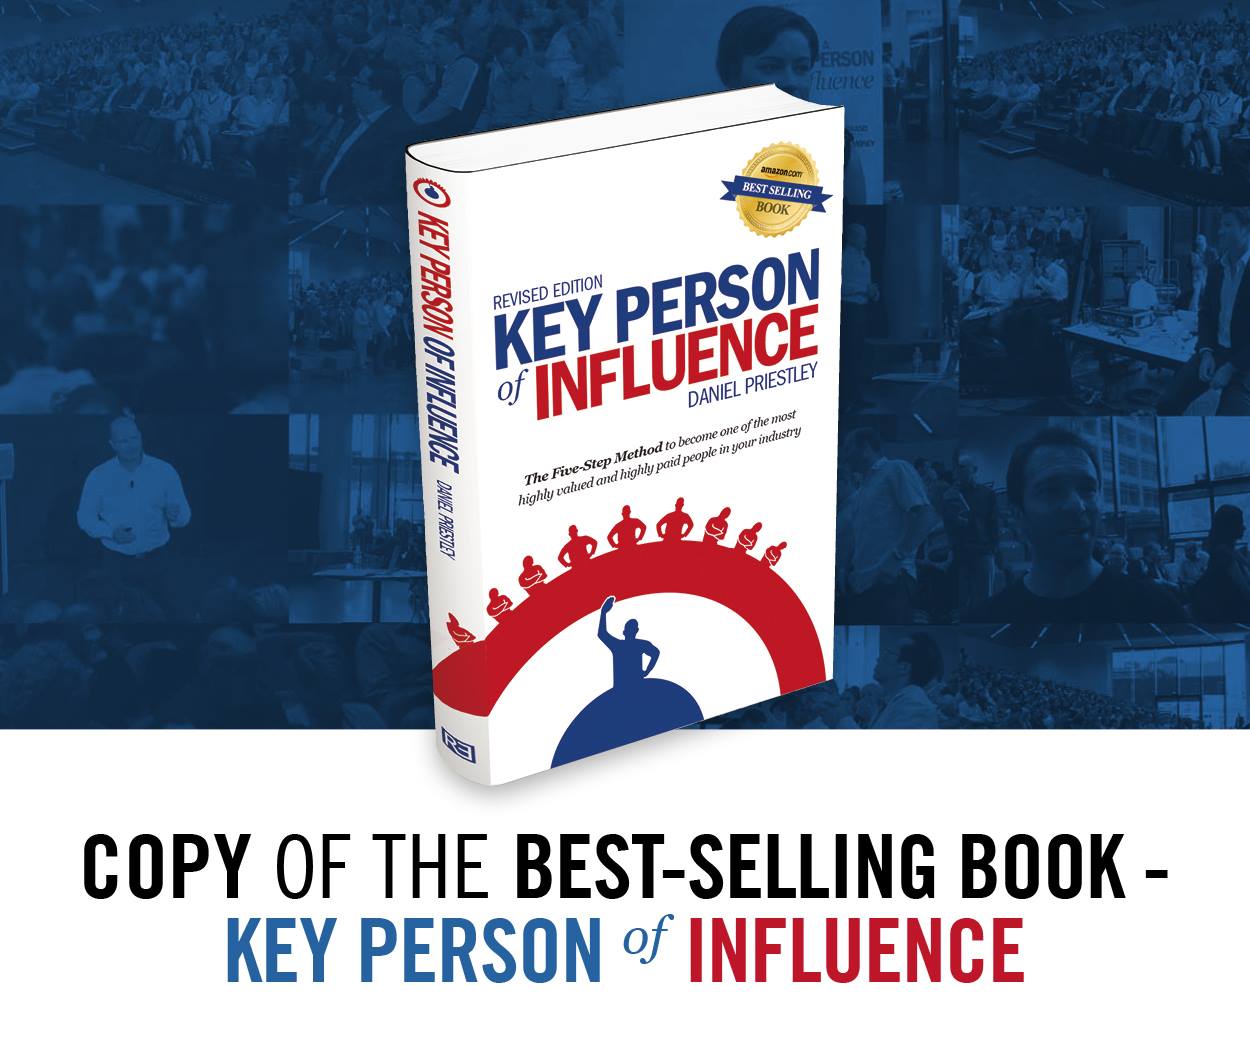 Key person of influence book